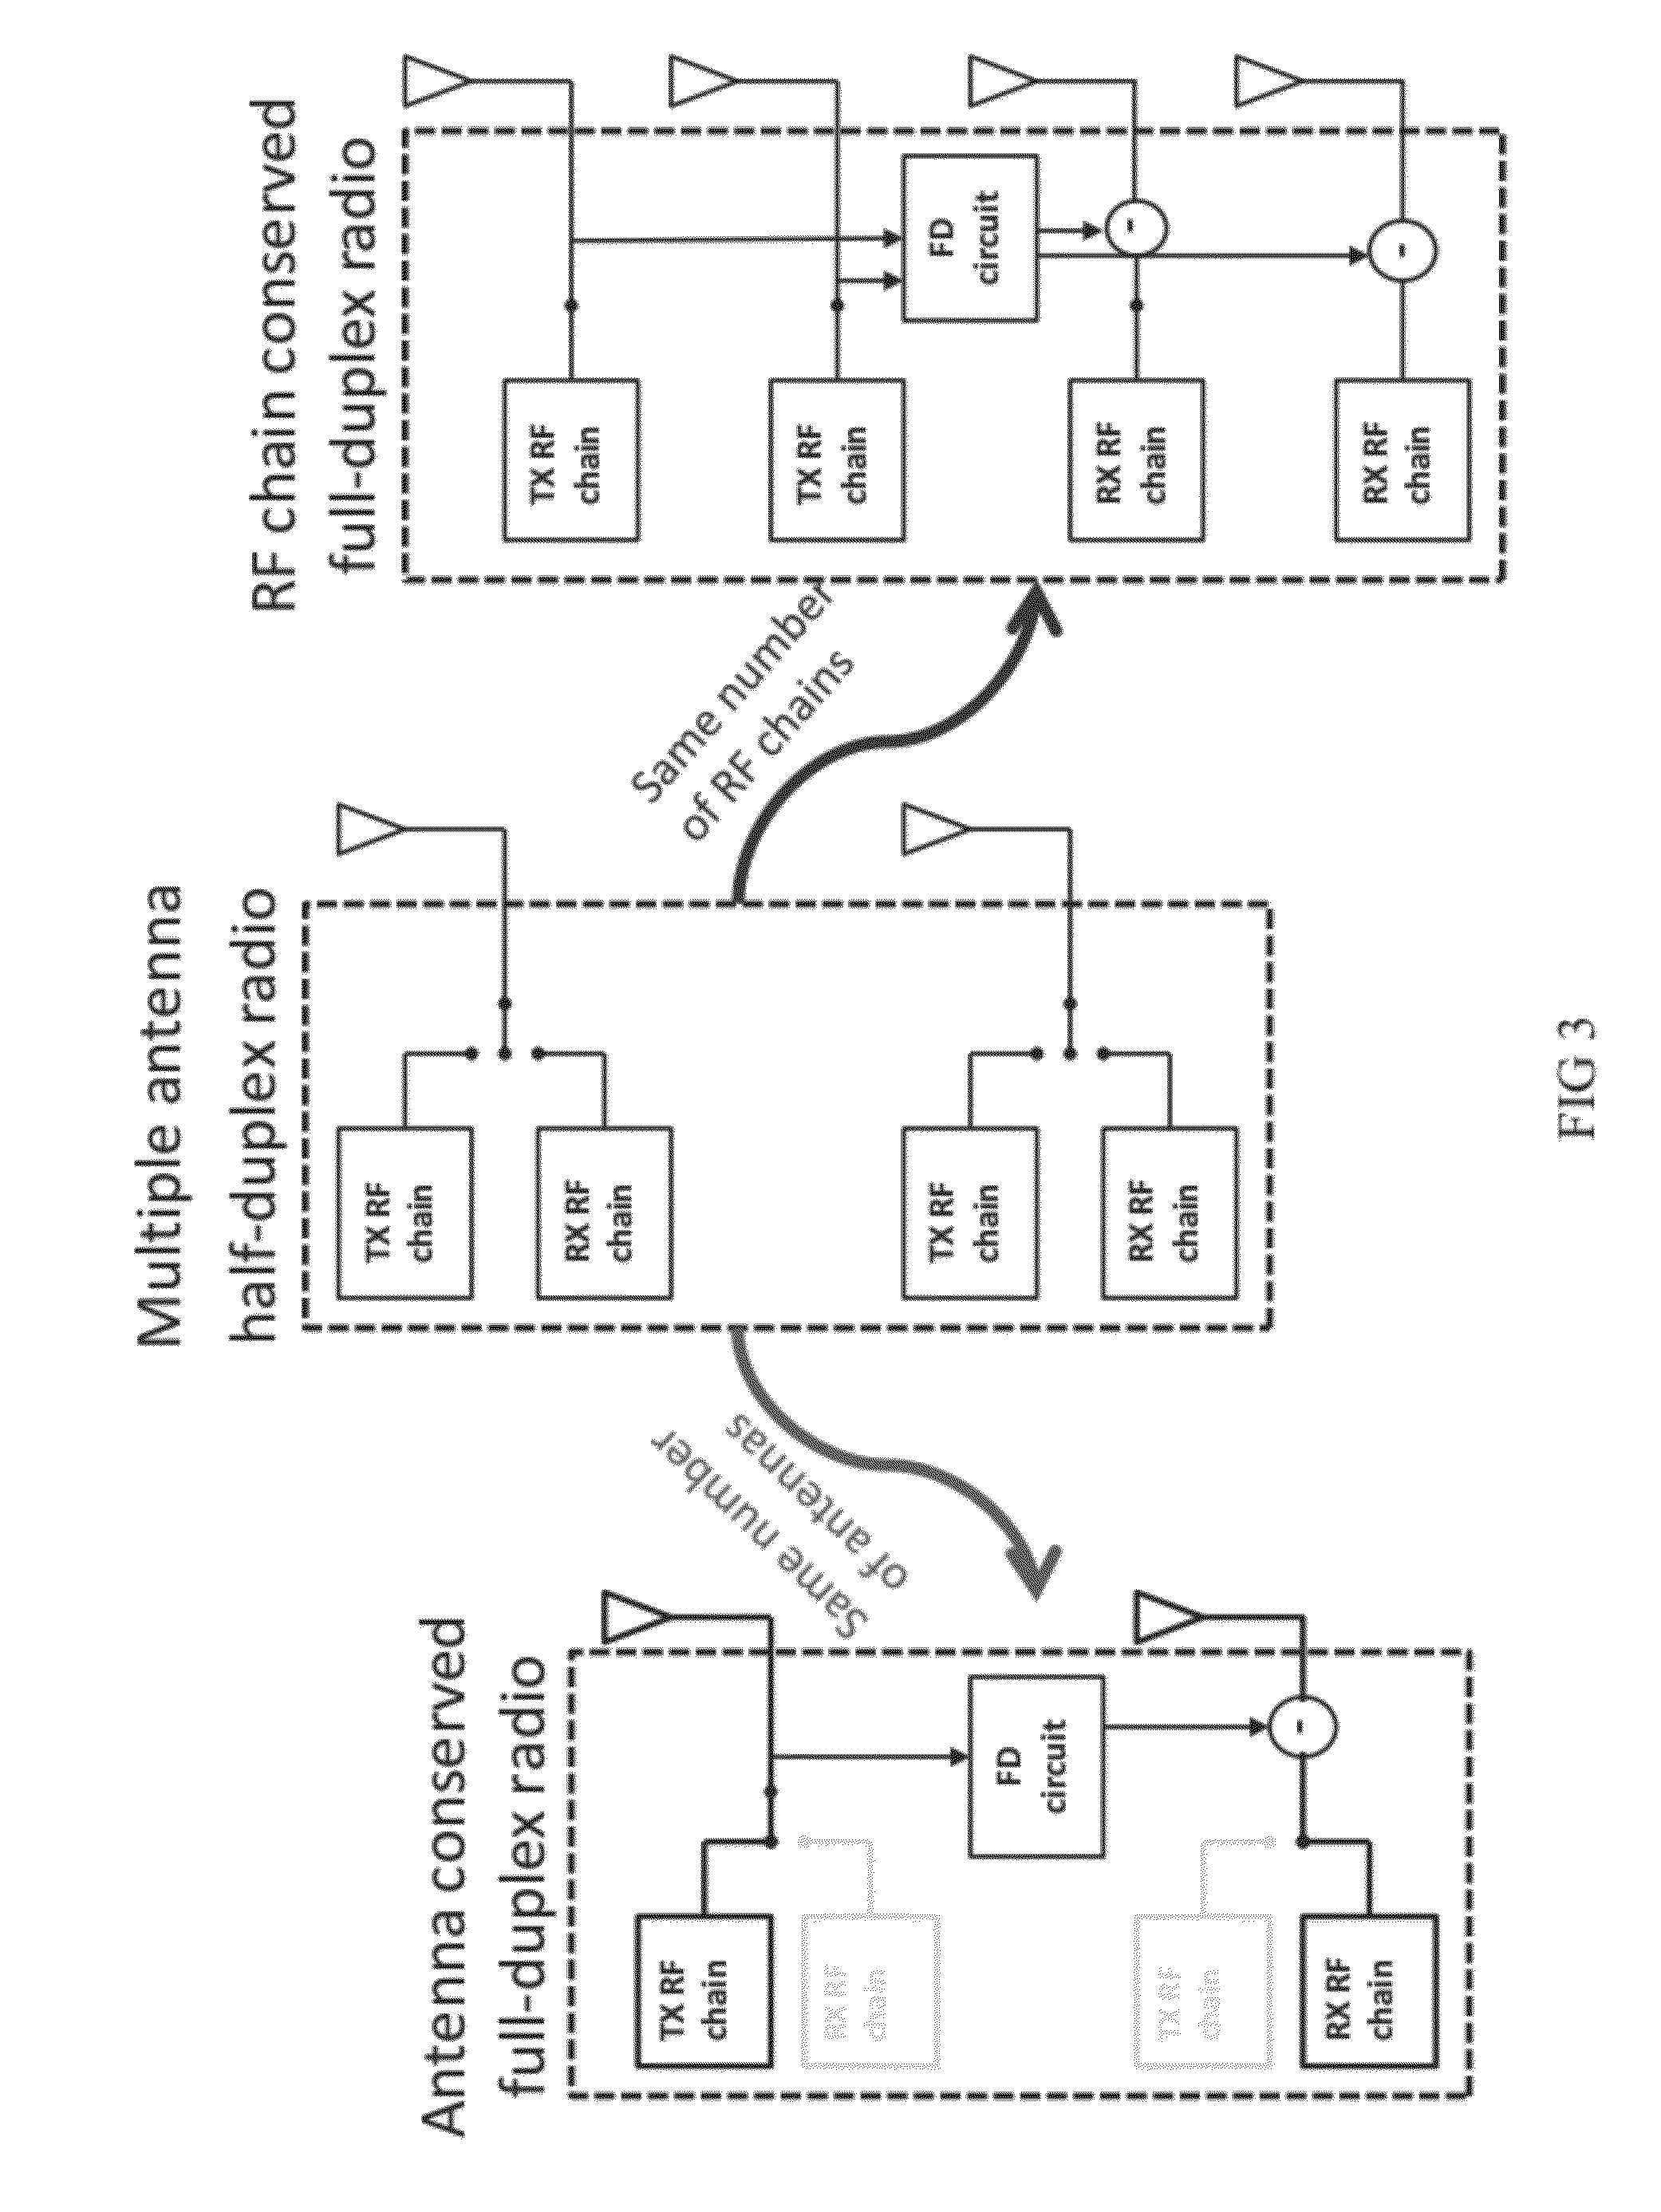 Method for a Canceling Self Interference Signal Using Active Noise Cancellation in RF Circuits and Transmission Lines for Full Duplex Simultaneous (In Time) and Overlapping (In Space) Wireless Transmission & Reception on the Same Frequency band